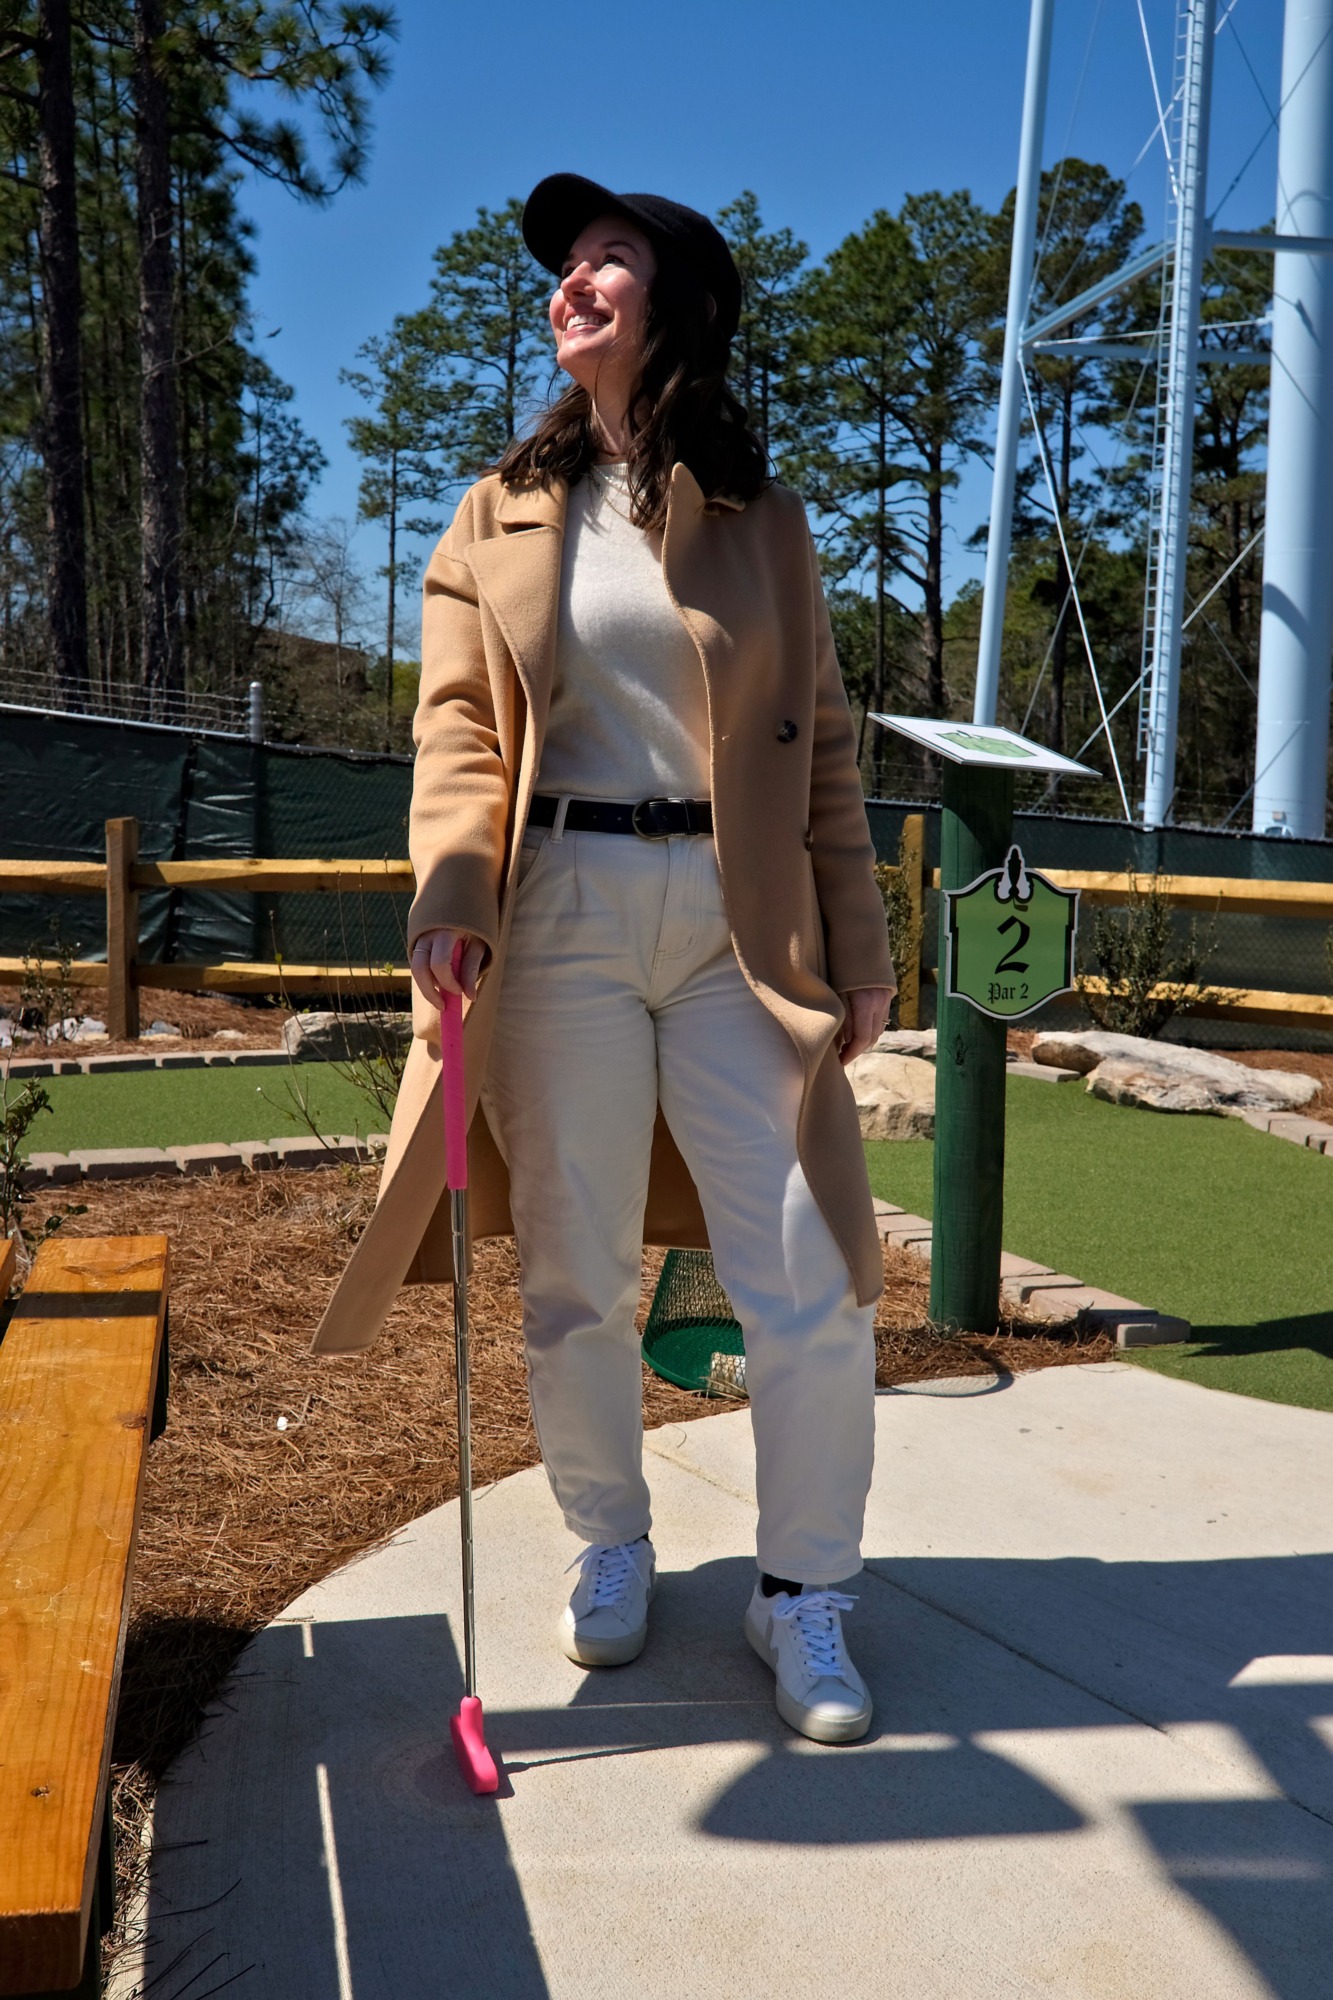 Alyssa wears a white sweater with white jeans and a camel coat and a baseball cap